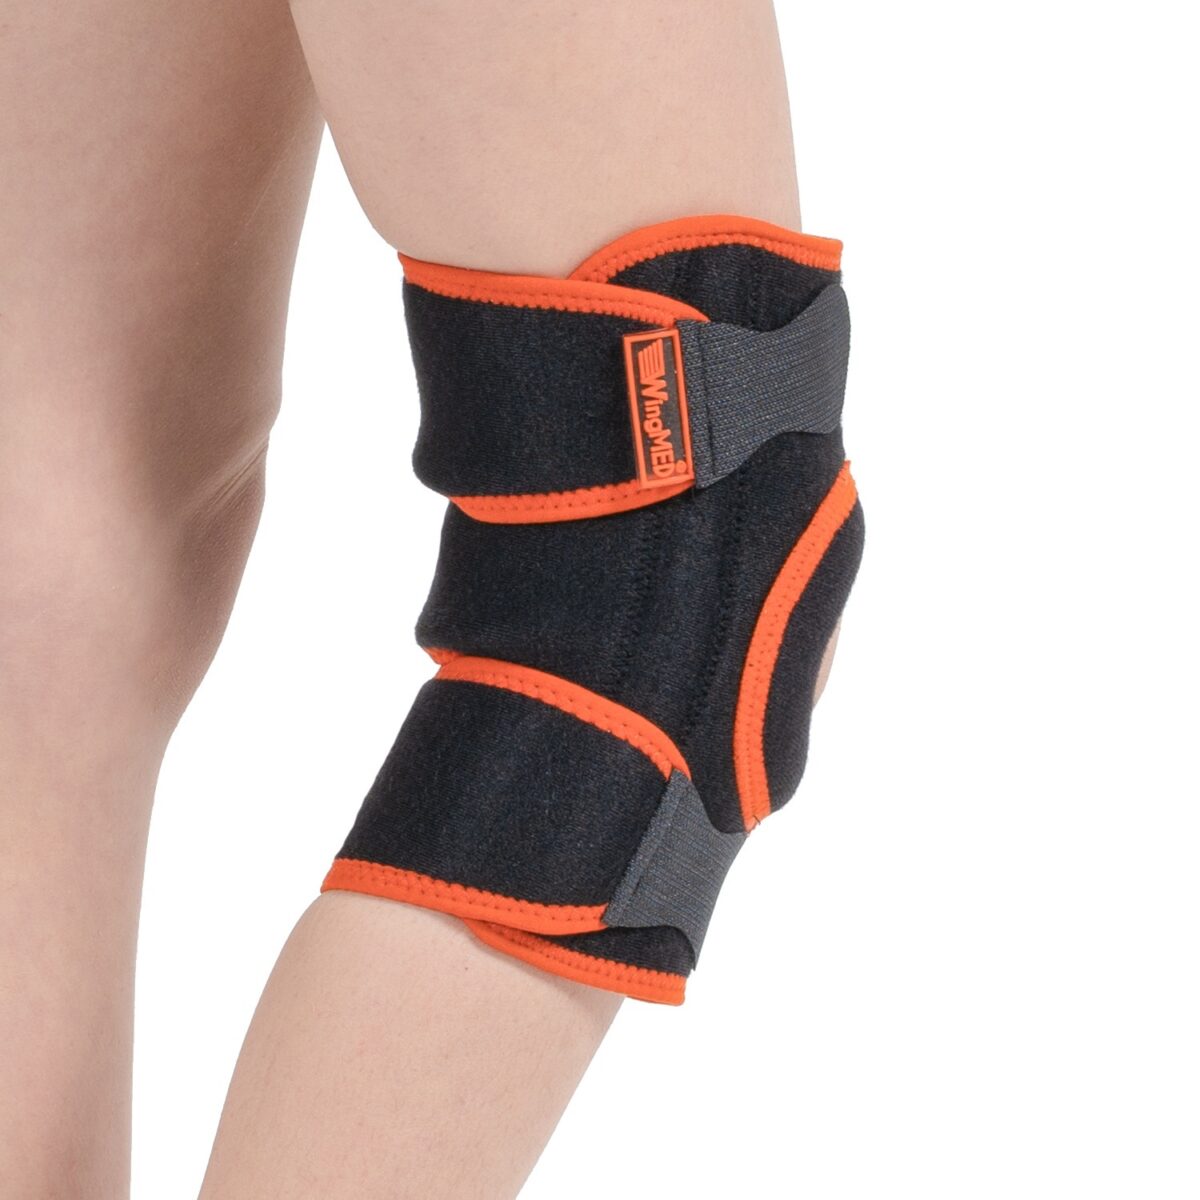 wingmed orthopedic equipments W918 ligament knee support 94